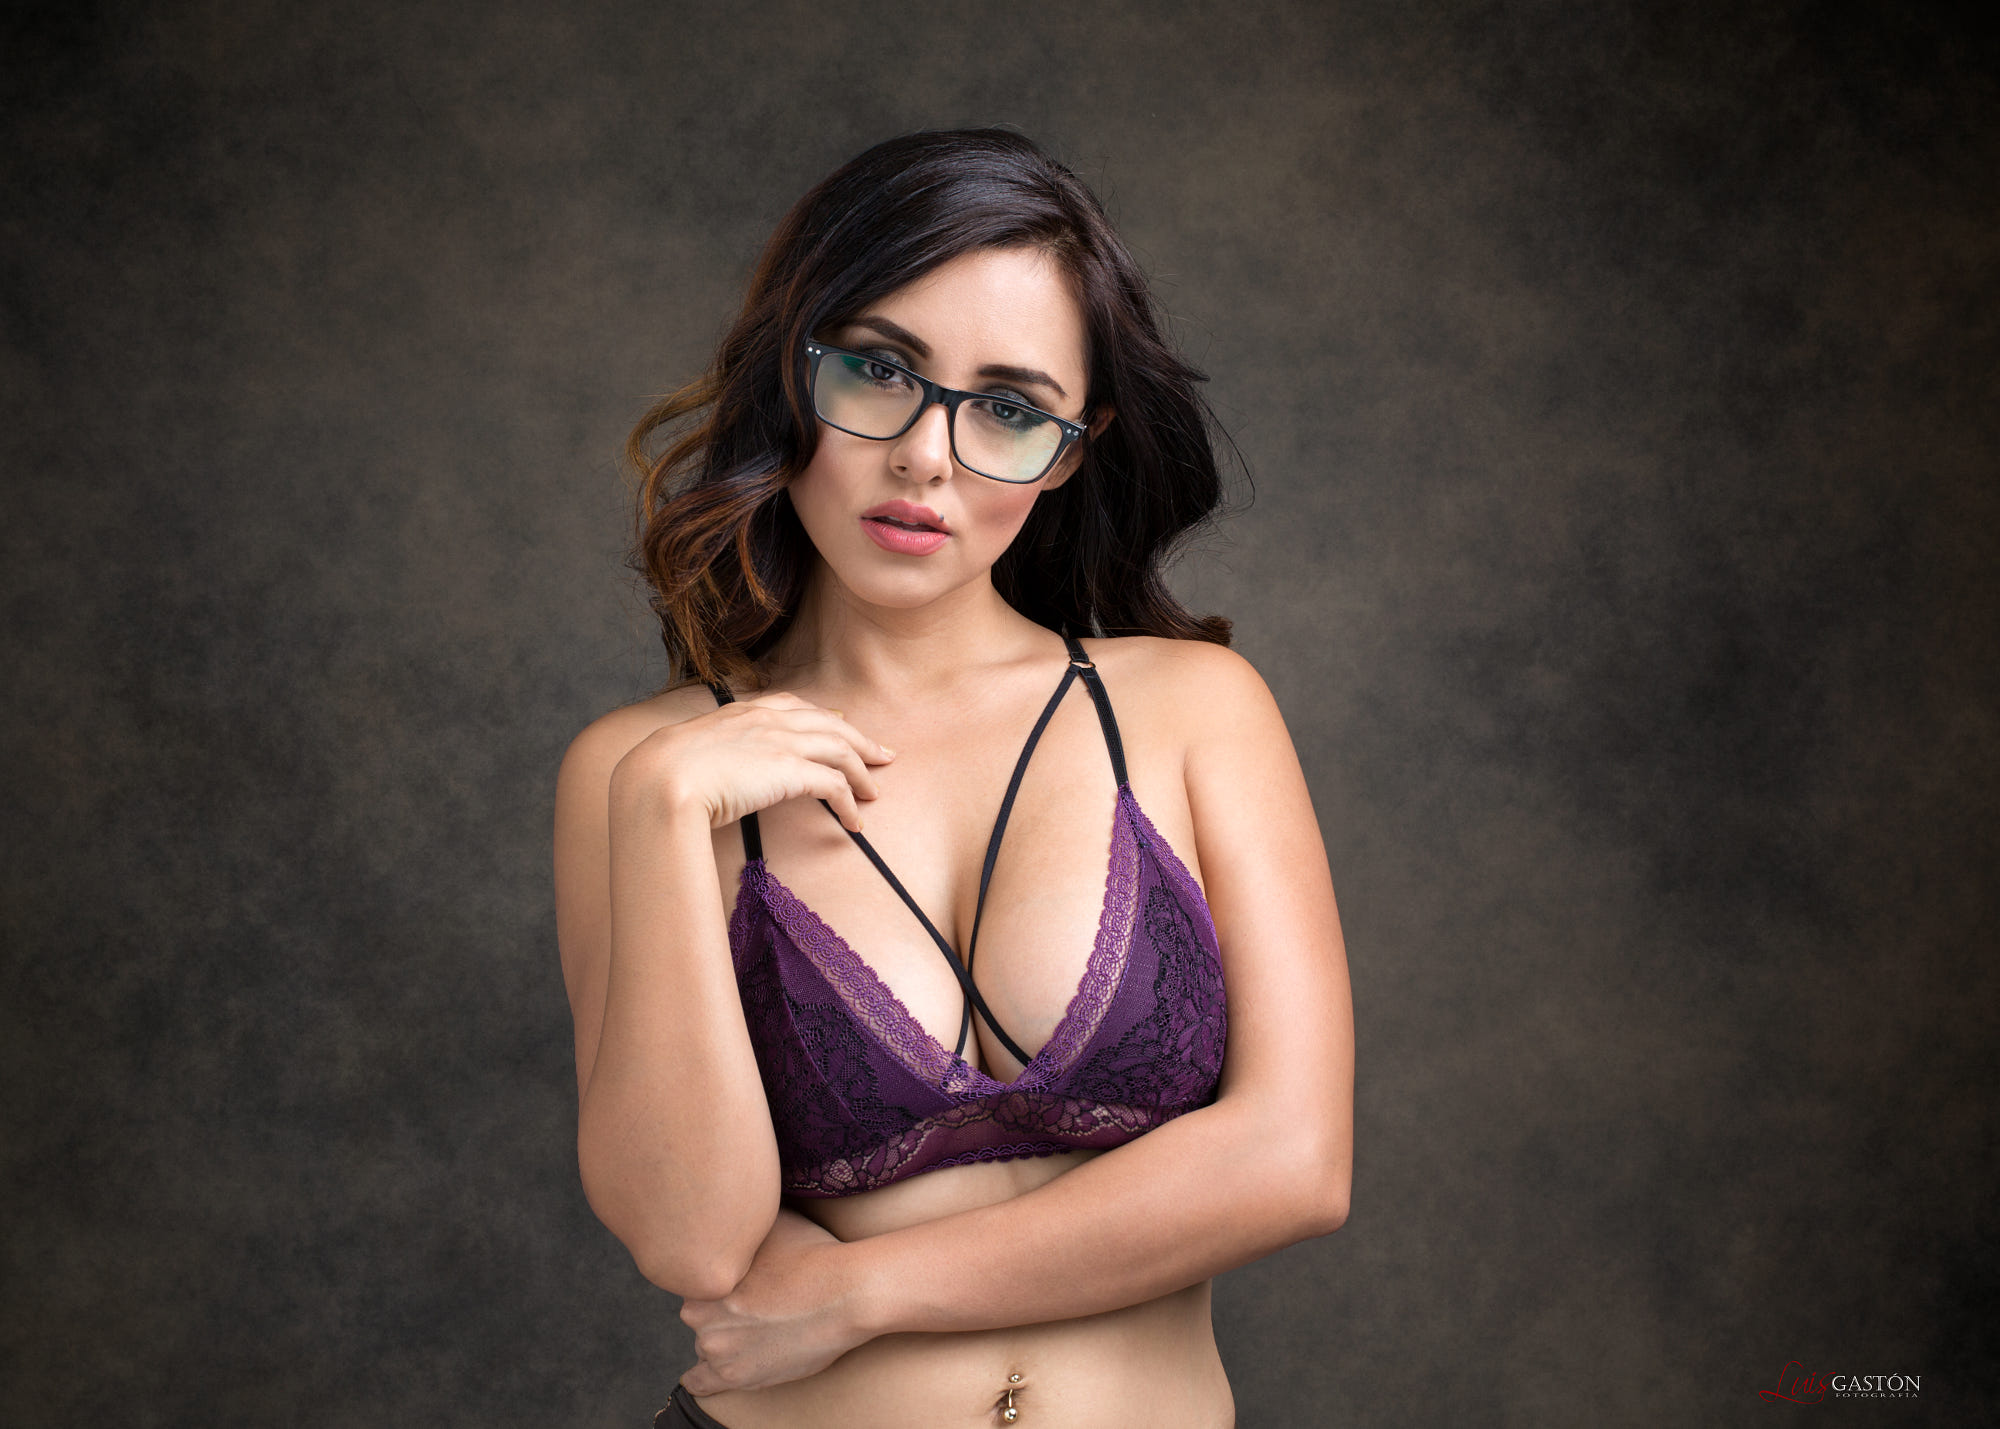 People 2000x1429 women brunette women with glasses pierced navel cleavage Dulce Soltero watermarked Luis Gastón simple background face